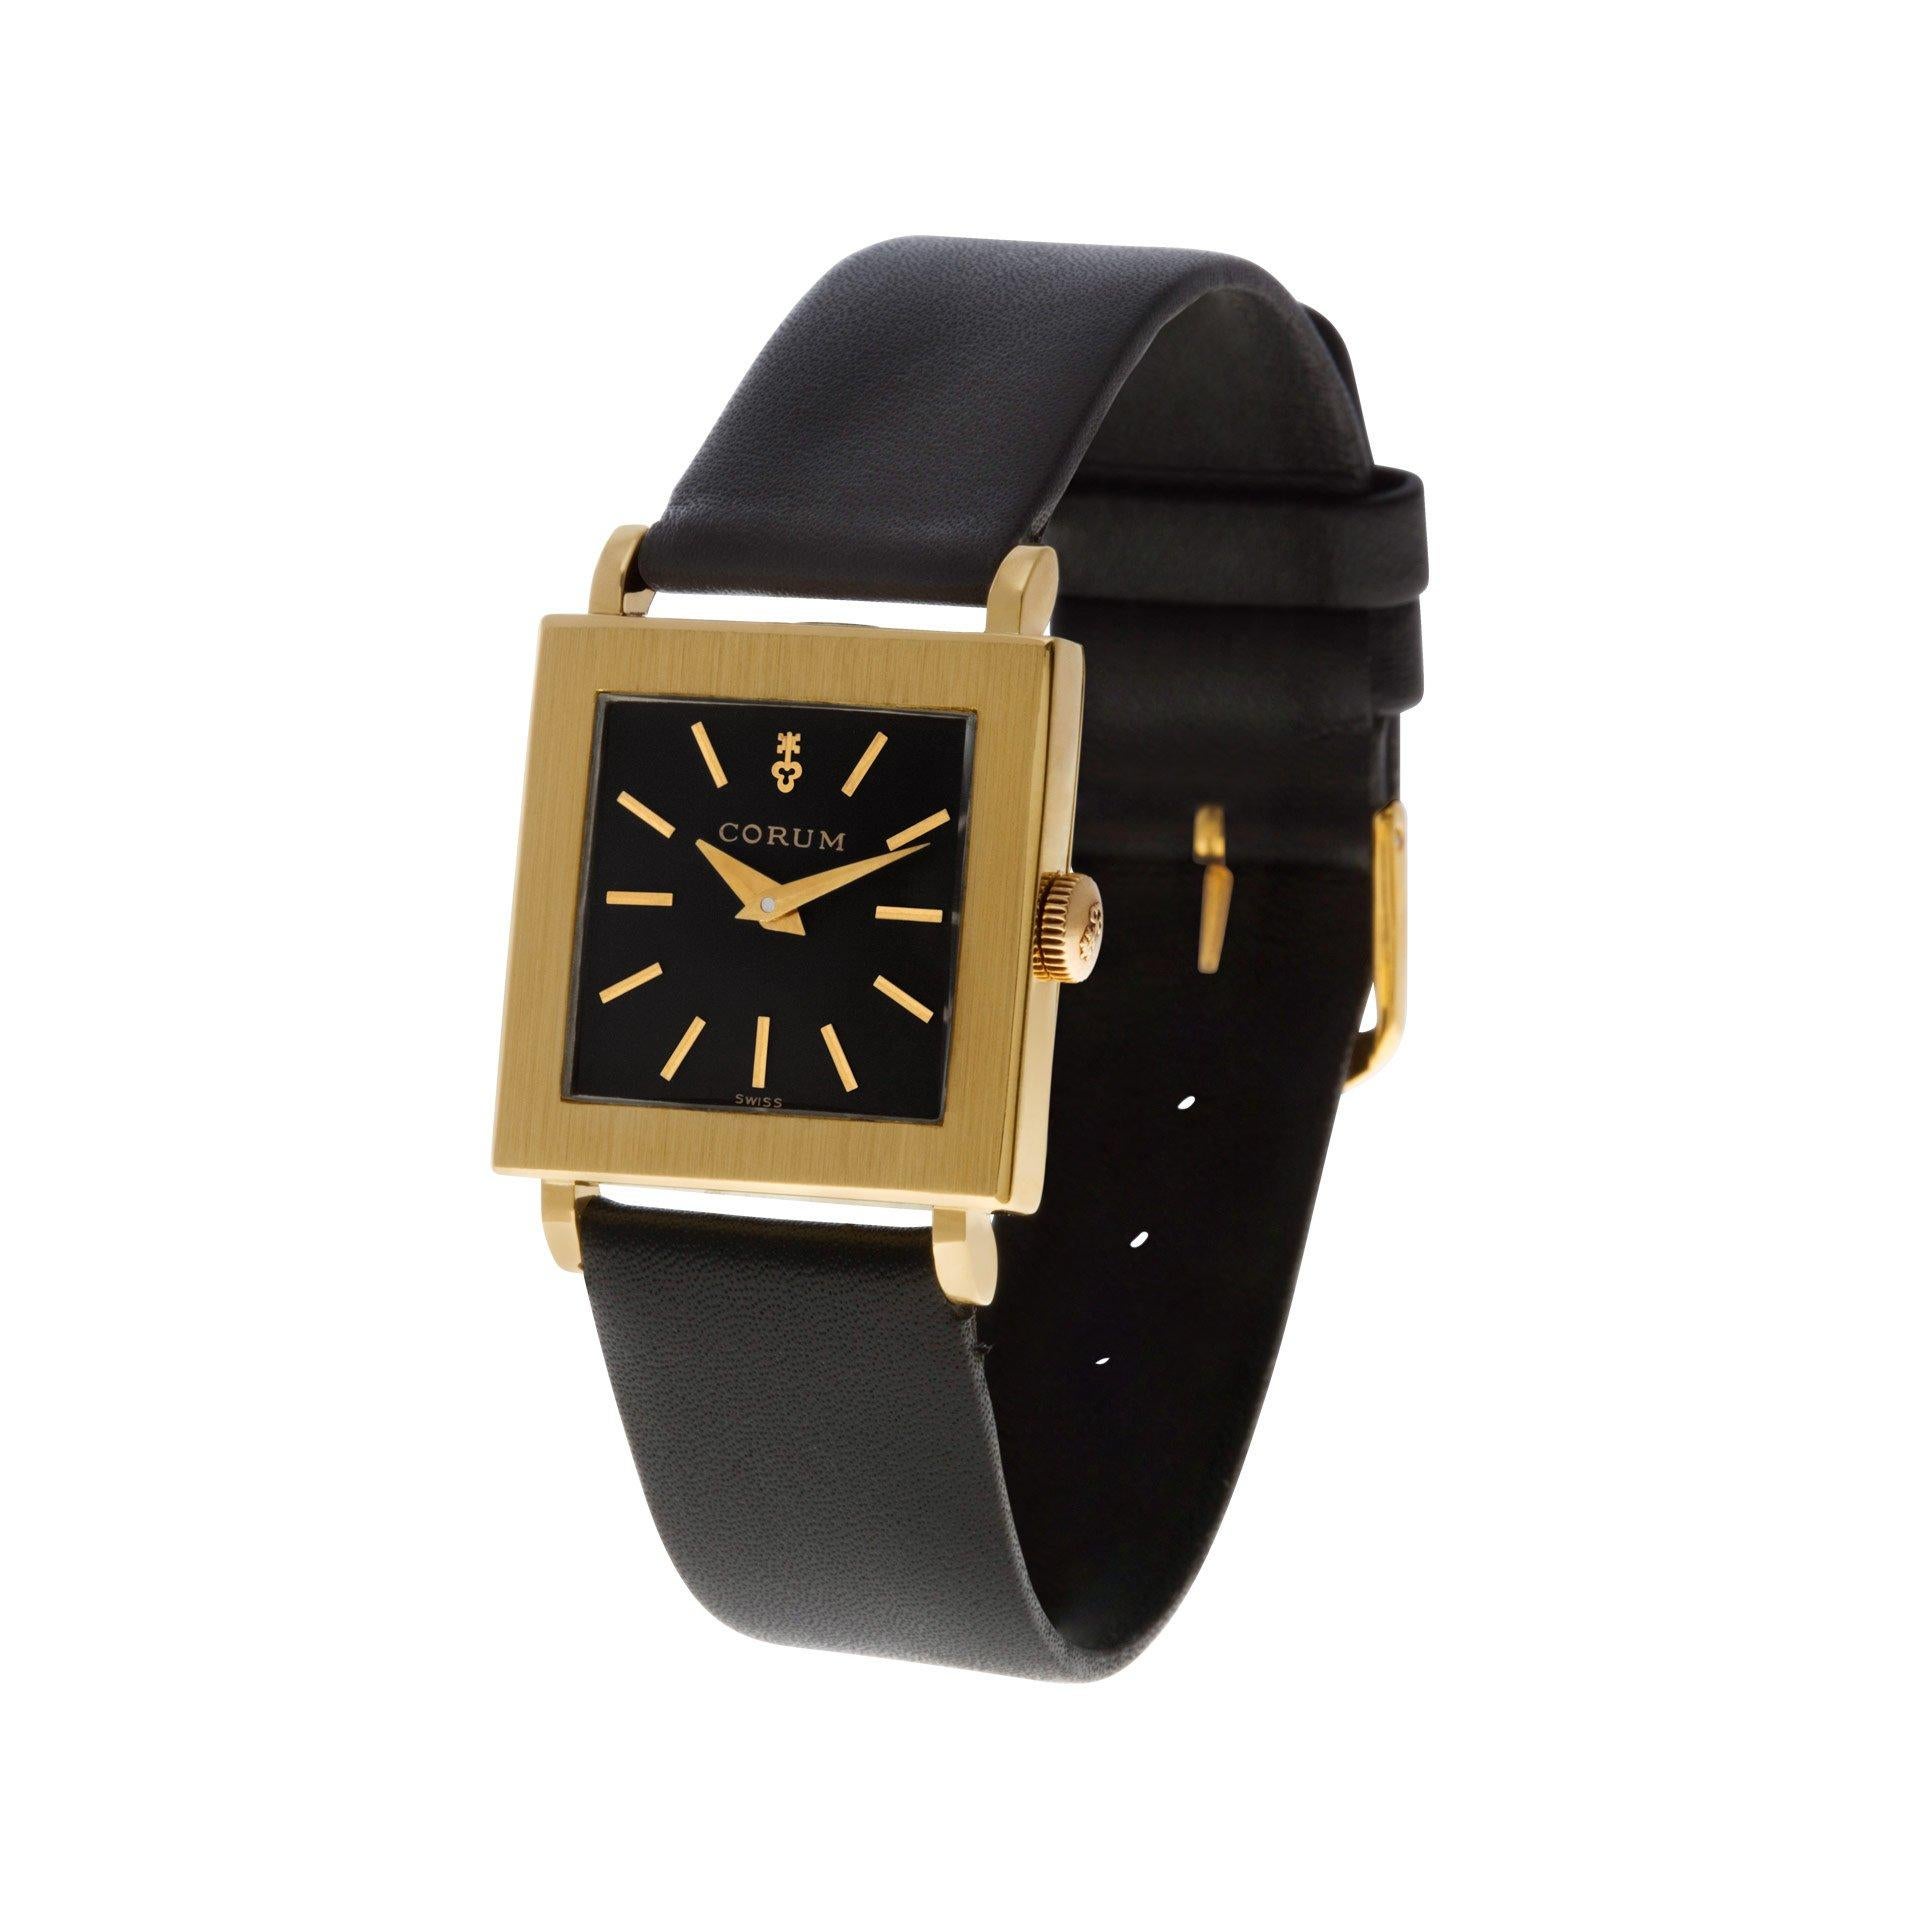 Corum in 18k on black leather strap. Manual. 25mm case size. Nice vintage piece! Circa 1960s. Fine Pre-owned Corum Watch.

Certified preowned Vintage Corum Classic watch is made out of yellow gold on a Black Leather strap with a Gold Plate tang